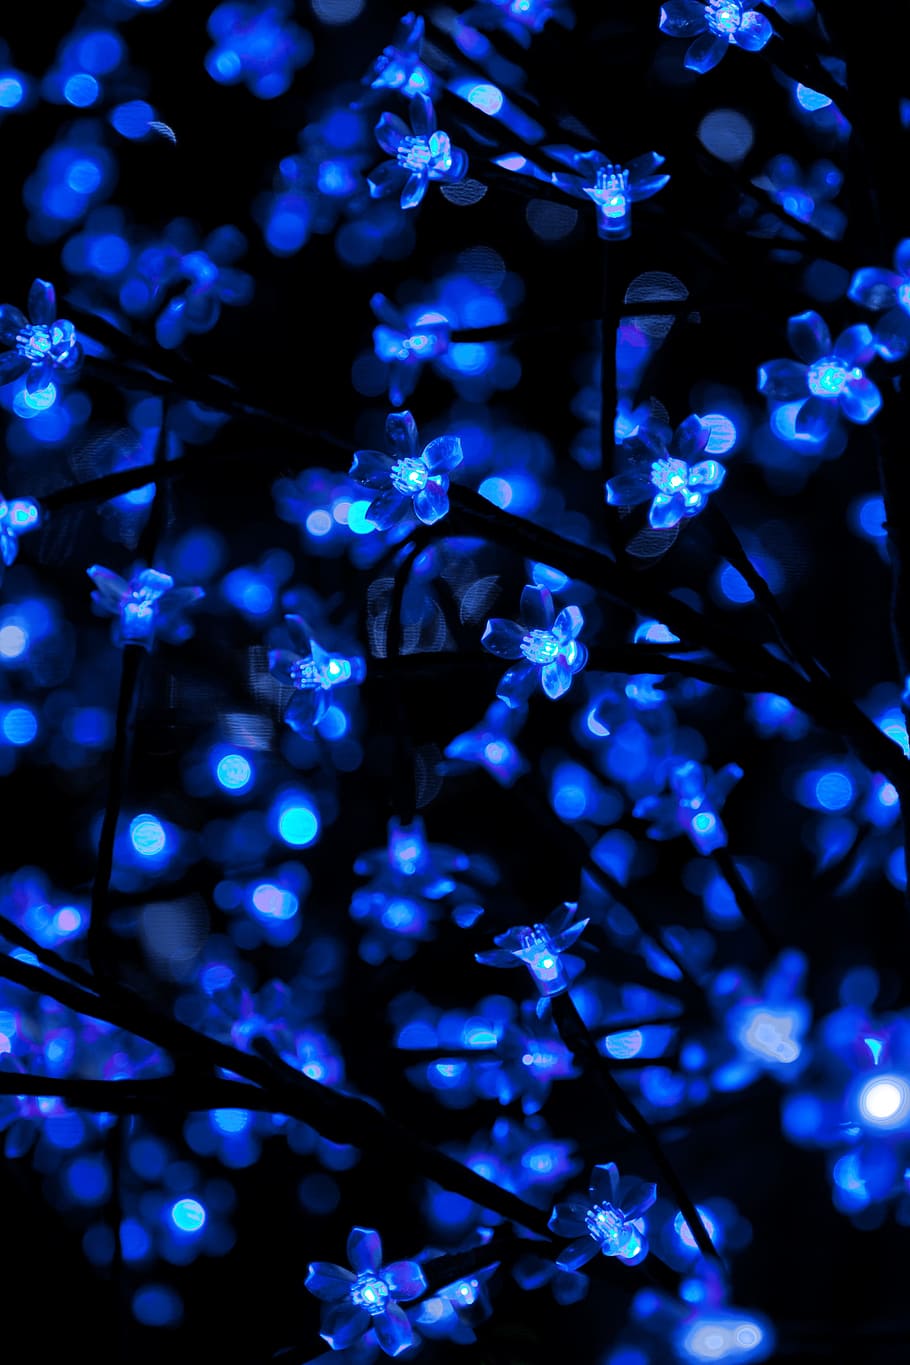 Details 200 lights aesthetic background - Abzlocal.mx